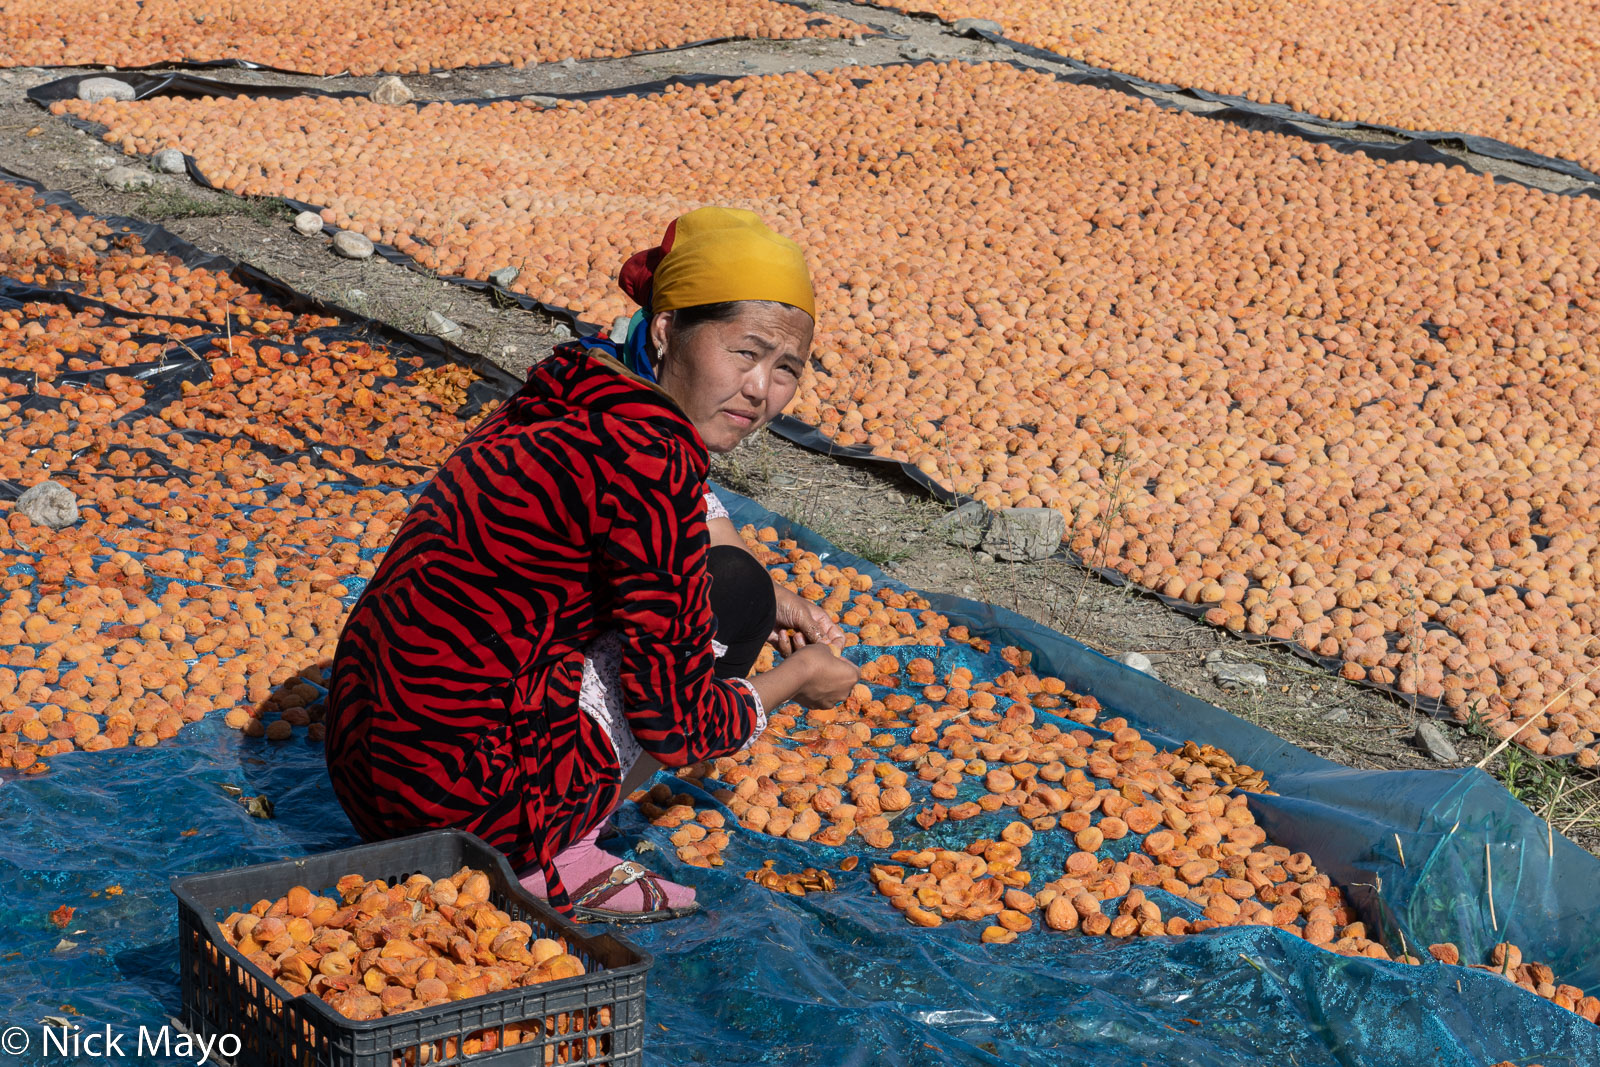 A woman sorting dried apricots in the village of Kara-Talaa.